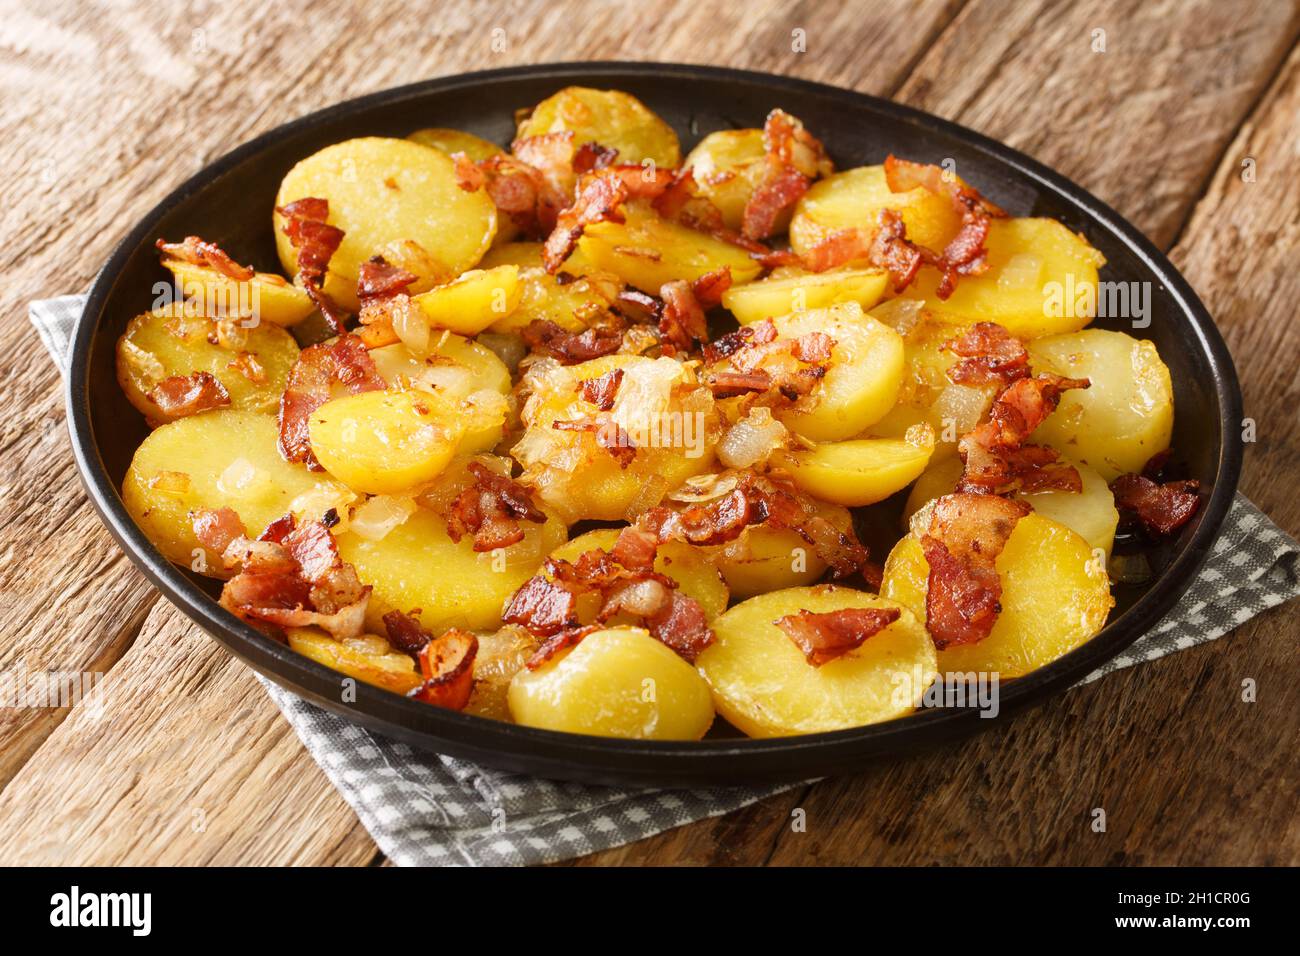 Delicious Fried Potato Bratkartoffeln With Bacon and Onion close up in the plate on the table. Horizontal Stock Photo